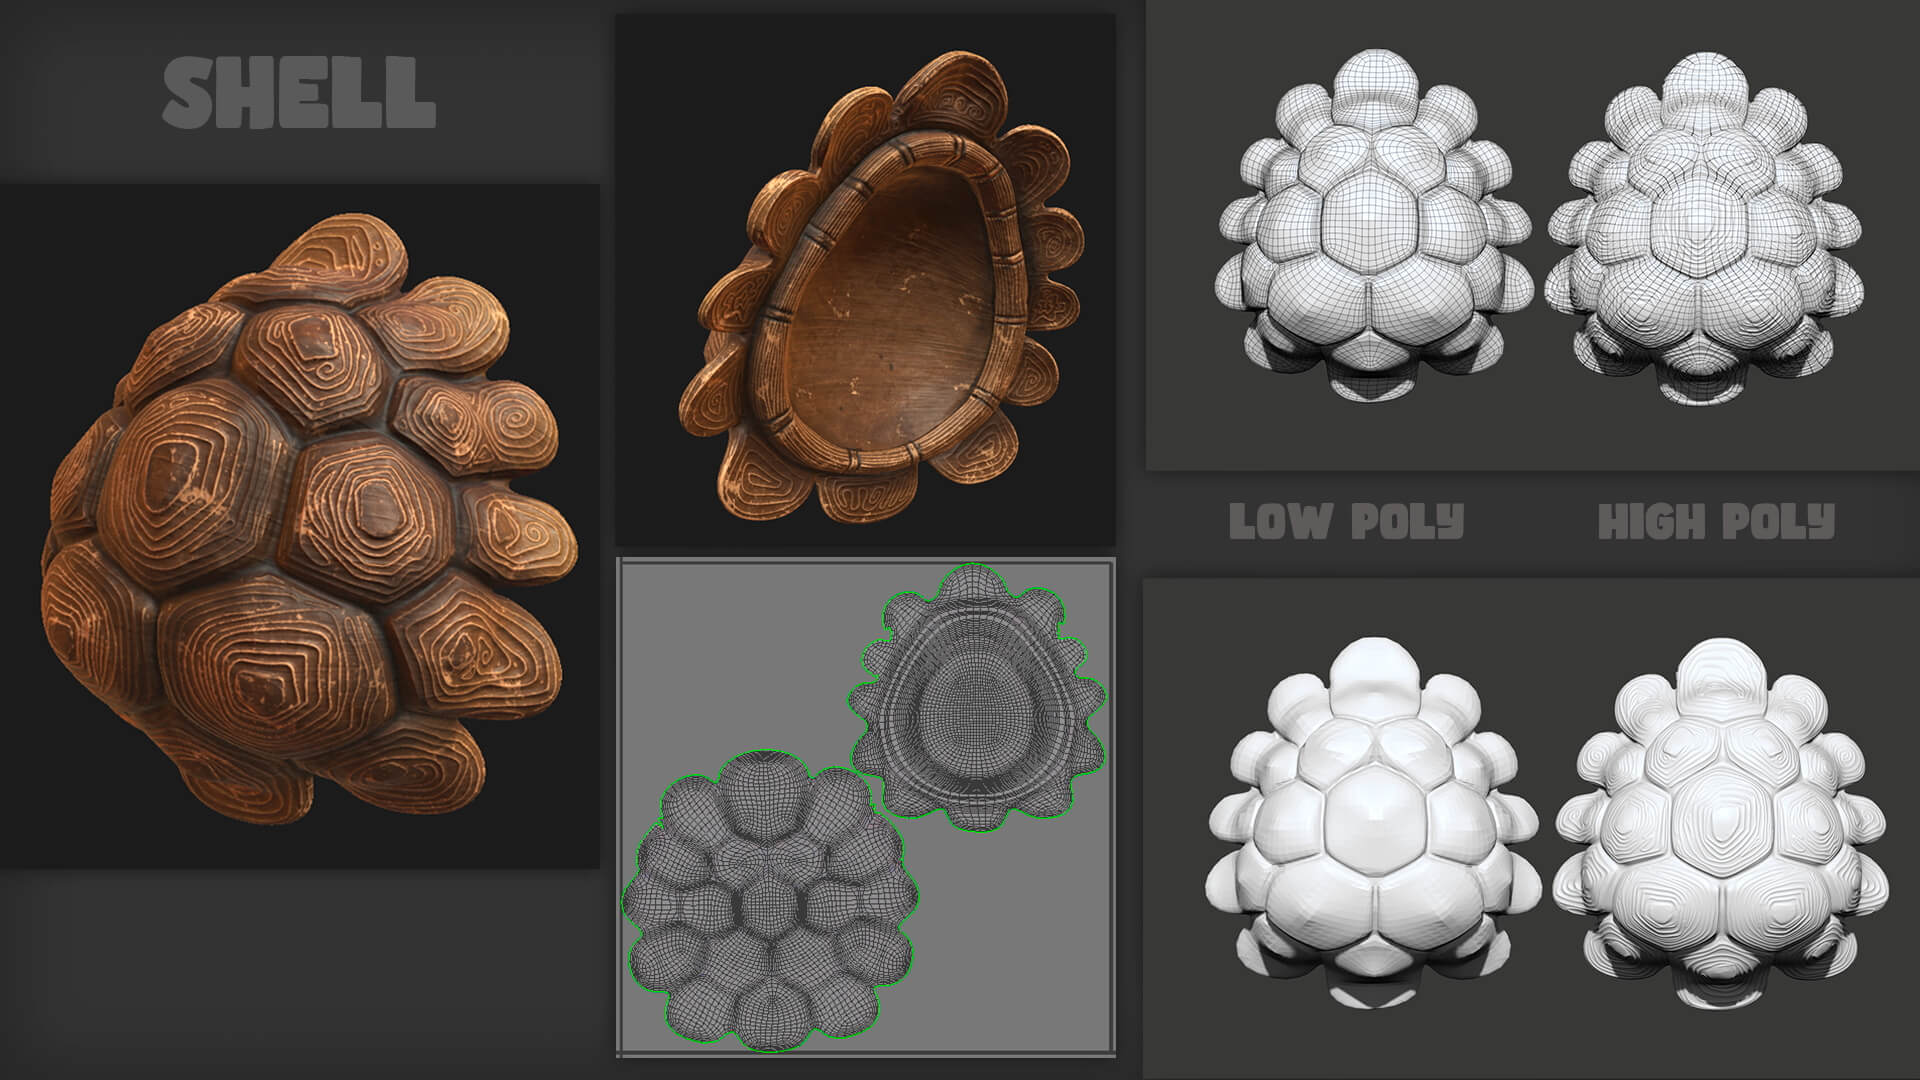 Various 3D renderings of a detailed turtle shell, showcasing low-poly and high-poly versions.